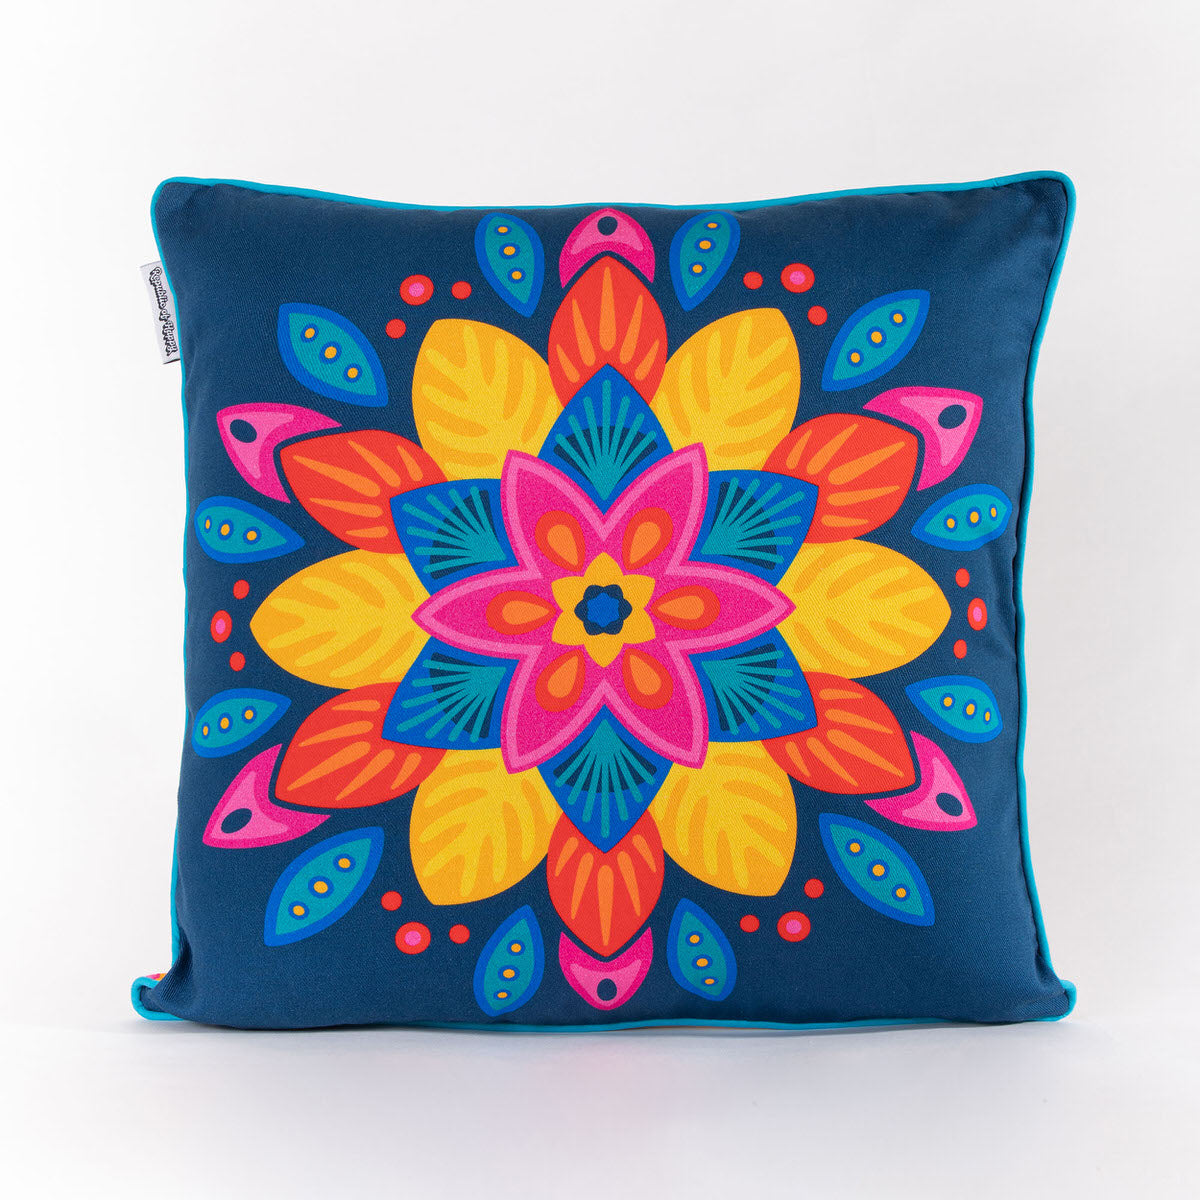 BLUE FLORAL MANDALA - Bright and colourful double-sided cushion cover